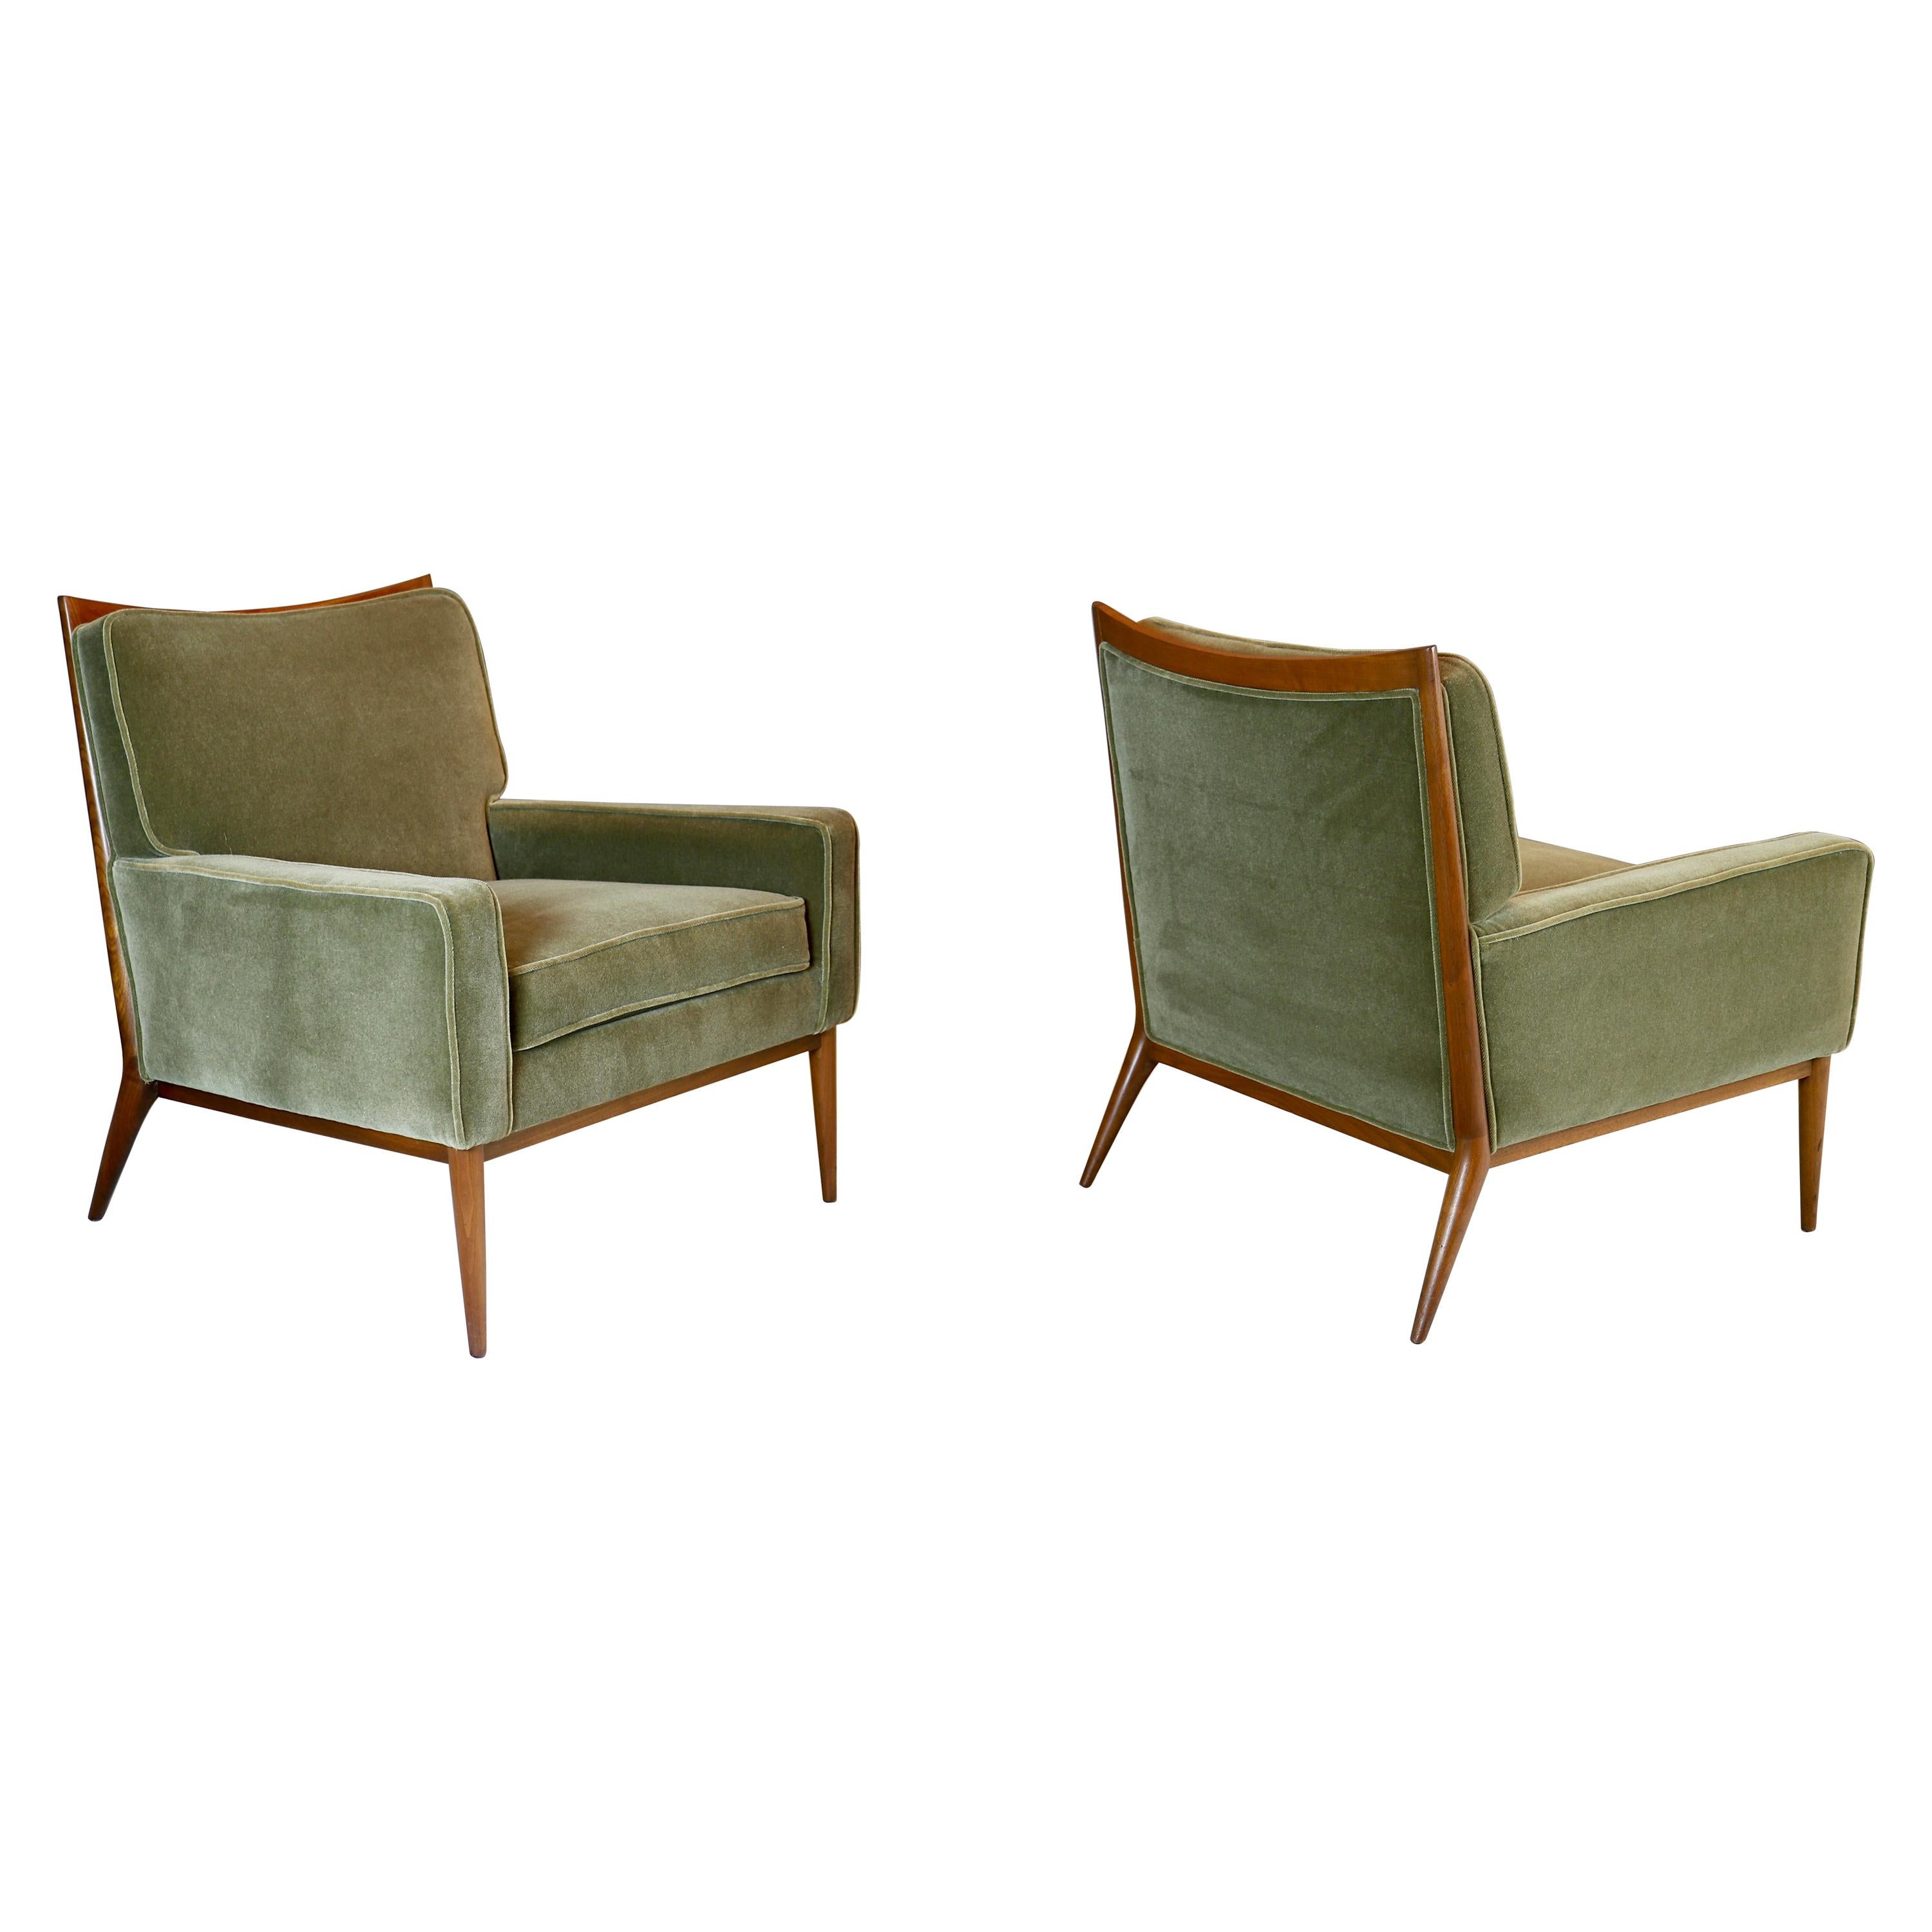 Pair of Paul McCobb Lounge Chairs for Calvin, 1950s